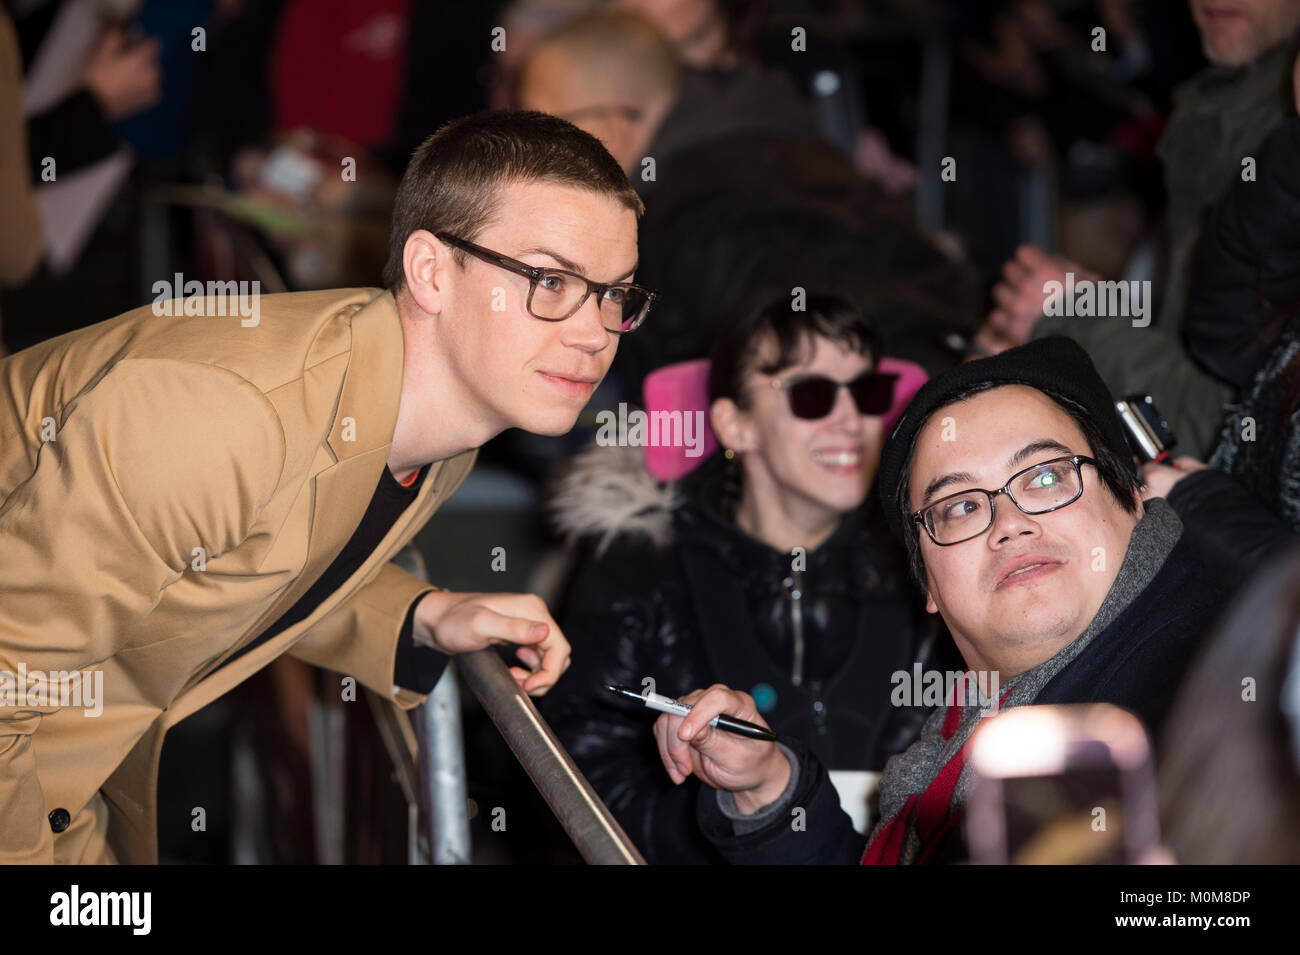 London, UK. 22nd Jan, 2018. Will Poulter attends the 'Maze Runner: The Death Cure' film premiere, London, UK - 22 Jan 2018 Credit: Gary Mitchell/Alamy Live News Stock Photo